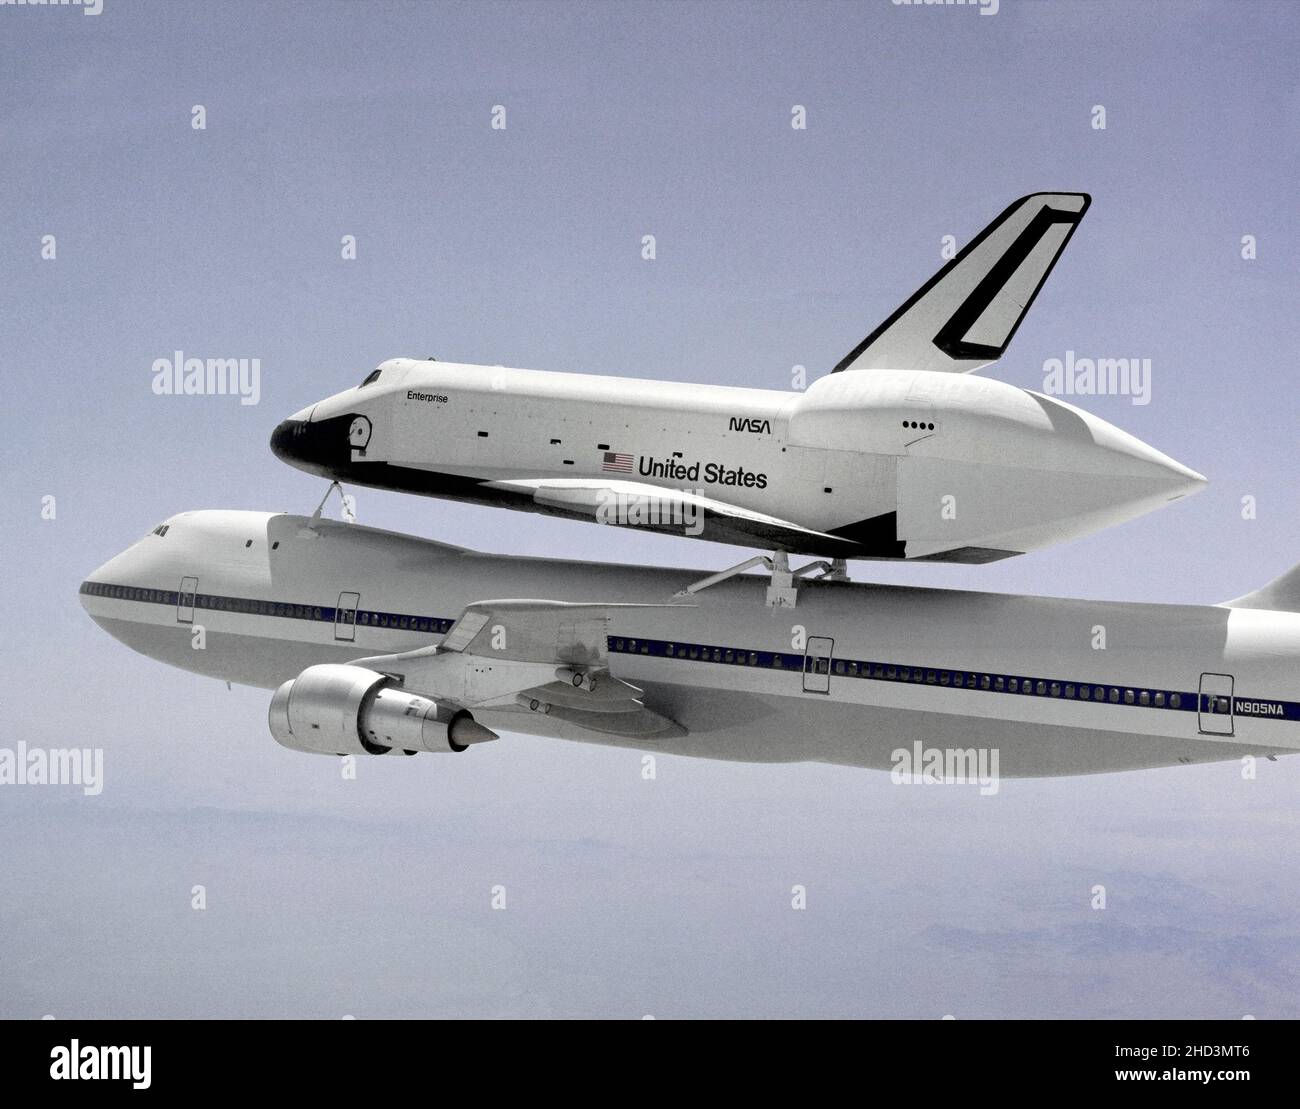 The Space Shuttle Enterprise, the nation's prototype space shuttle orbiter, departed NASA's Dryden Flight Research Center, Edwards, California, at 11:00 a.m., 16 May 1983, on the first leg of its trek to the Paris Air Show at Le Bourget Airport, Paris, France. Carried by the huge 747 Shuttle Carrier Aircraft (SCA), the first stop for the Enterprise was Peterson AFB, Colorado Springs, Colorado. Piloting the 747 on the Europe trip were Joe Algranti, Johnson Space Center Chief Pilot, Astronaut Dick Scobee, and NASA Dryden Chief Pilot Tom McMurtry. Flight engineers for that portion of the flight w Stock Photo